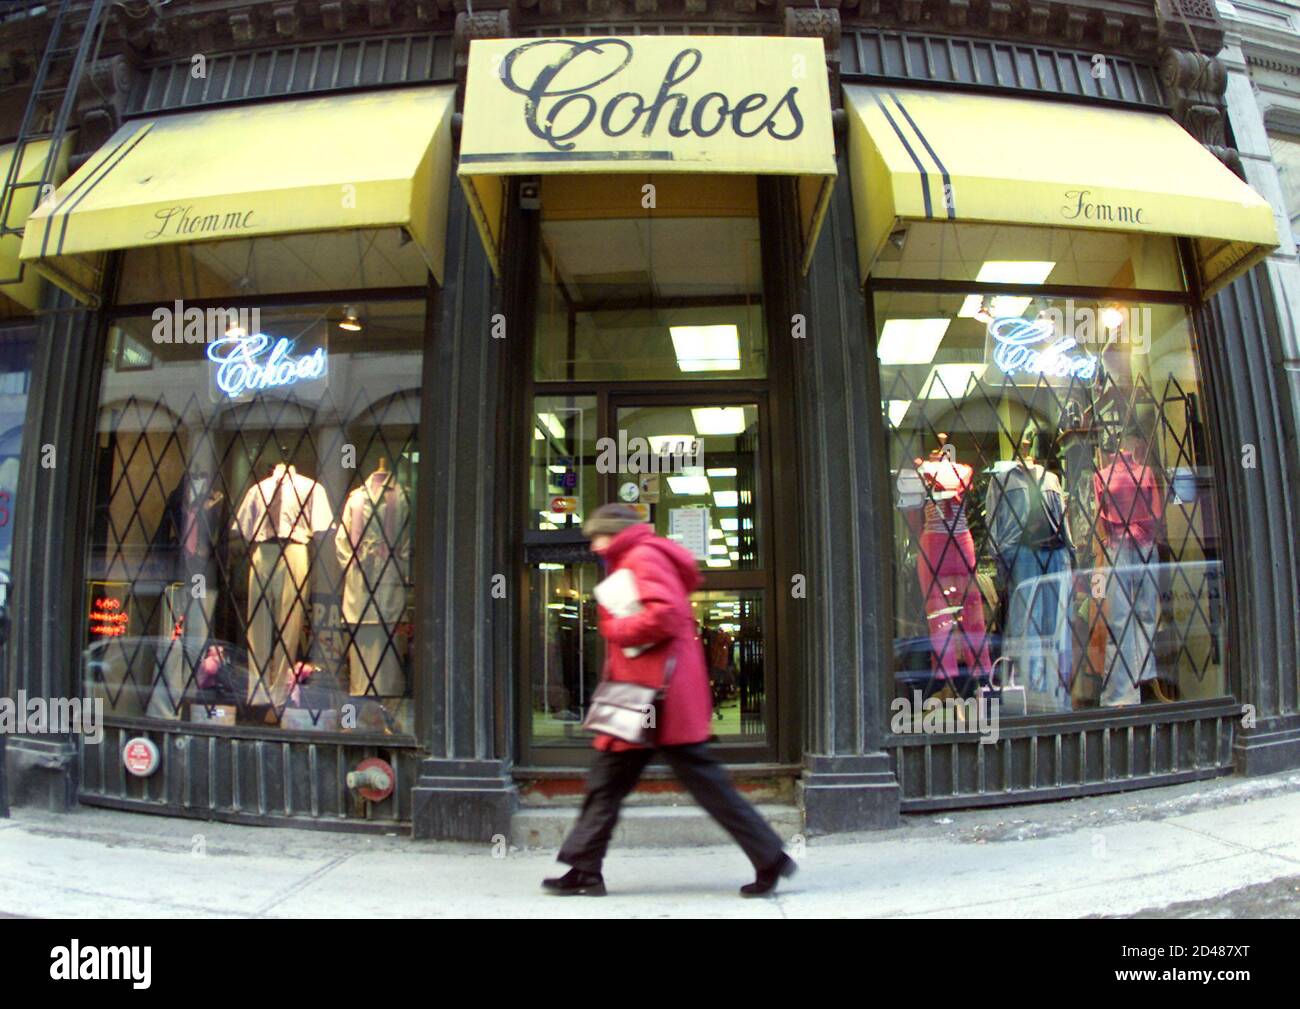 A pedestrian passes a Cohoes clothing store in downtown Montreal, March 1,  2001. The Canadian Mounties seized thousands of counterfeit Tommy Hilfiger,  Calvin Klein and other designer clothes worth more than C$800,000